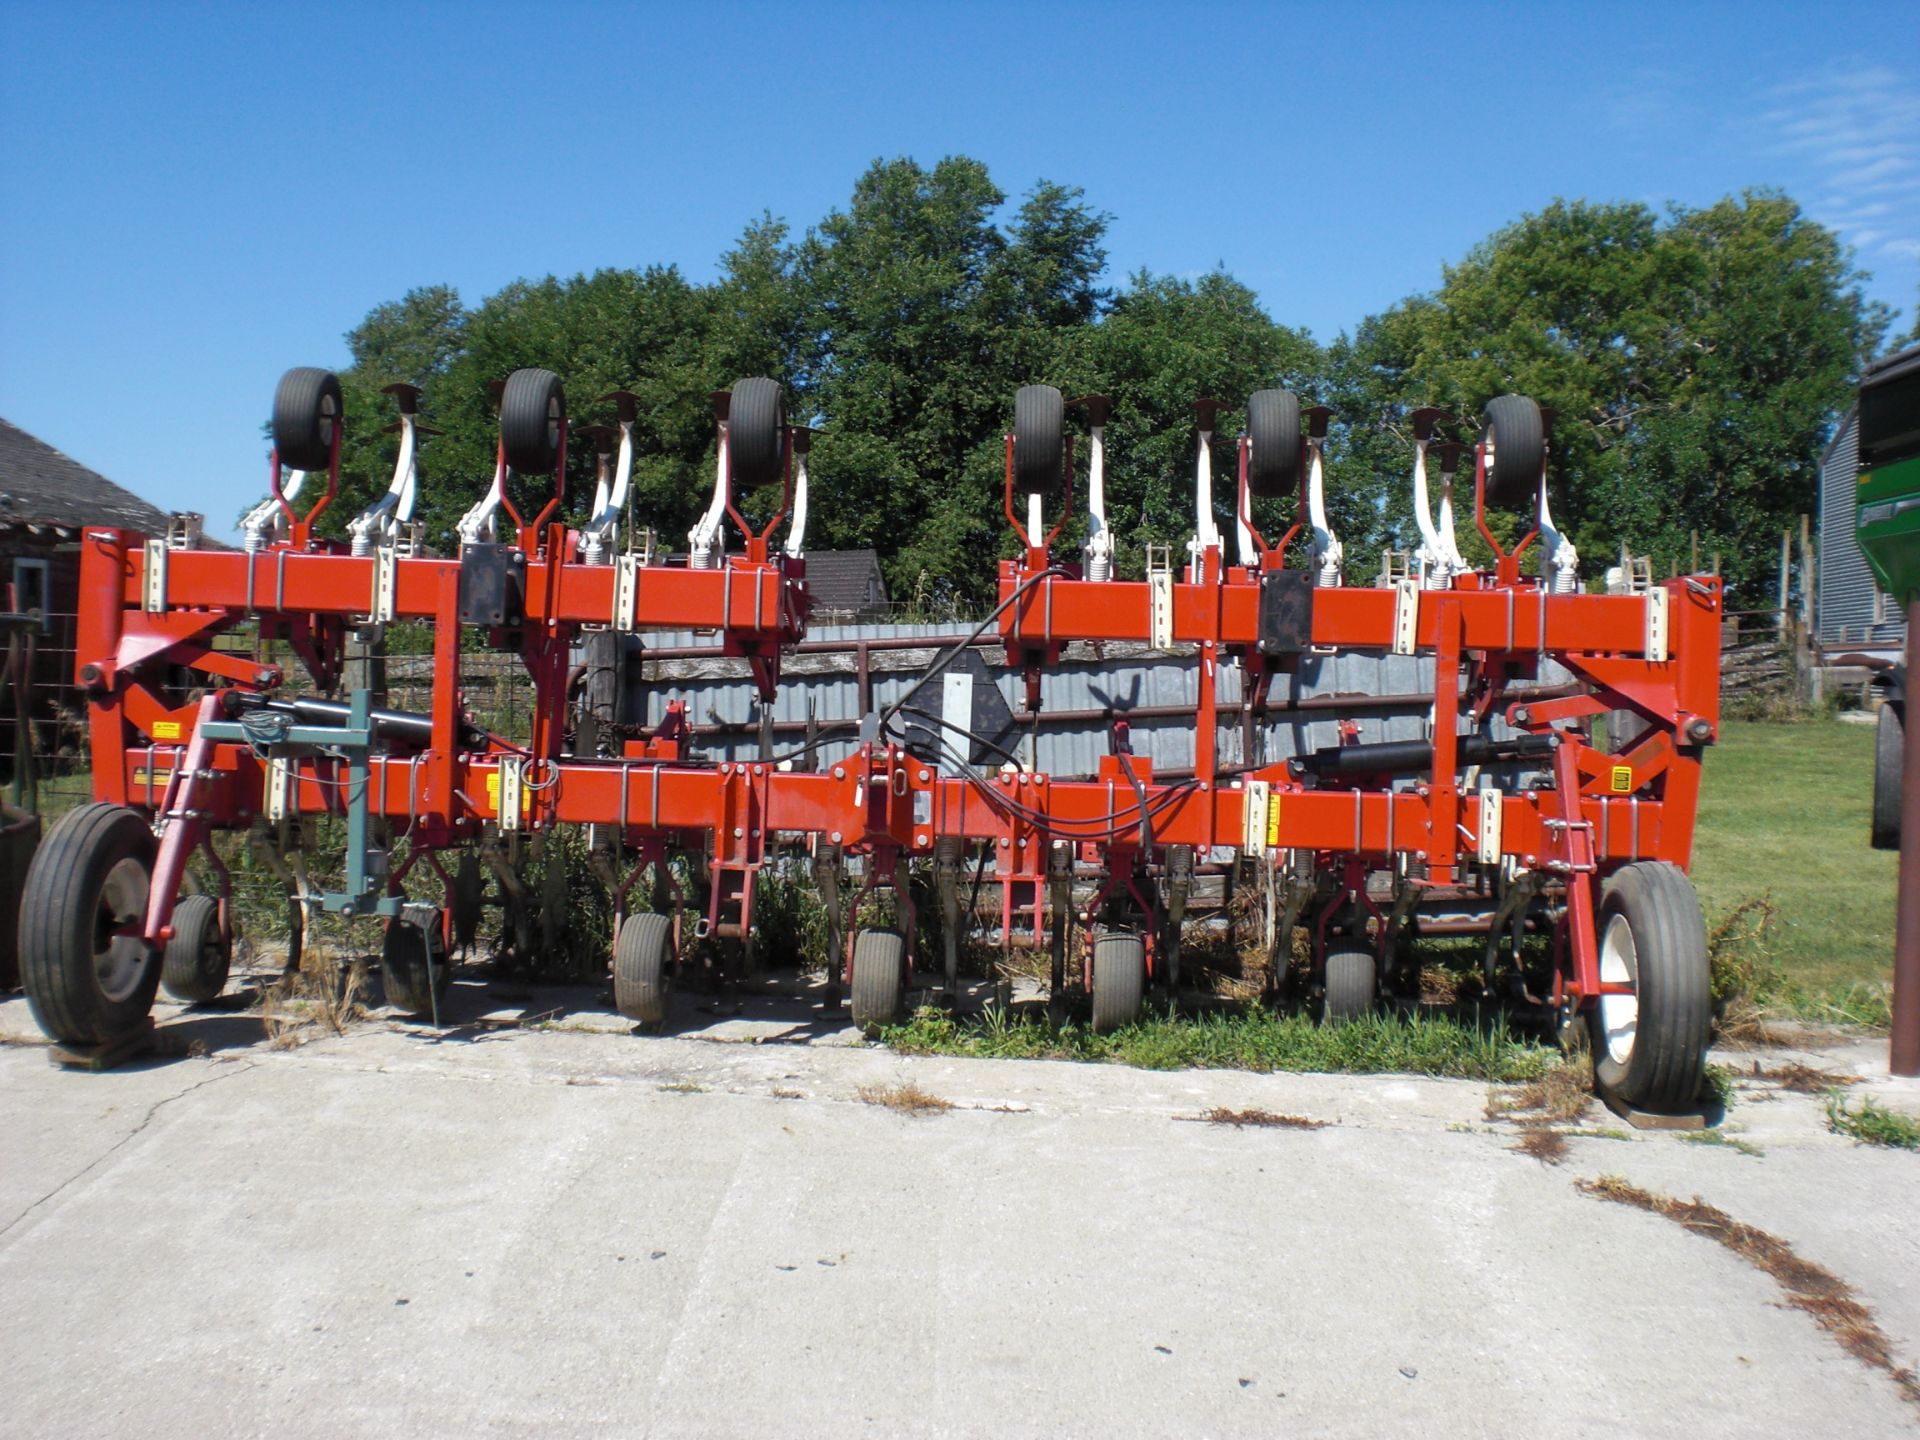 12-30 Wilrich cultivator, guidance system.